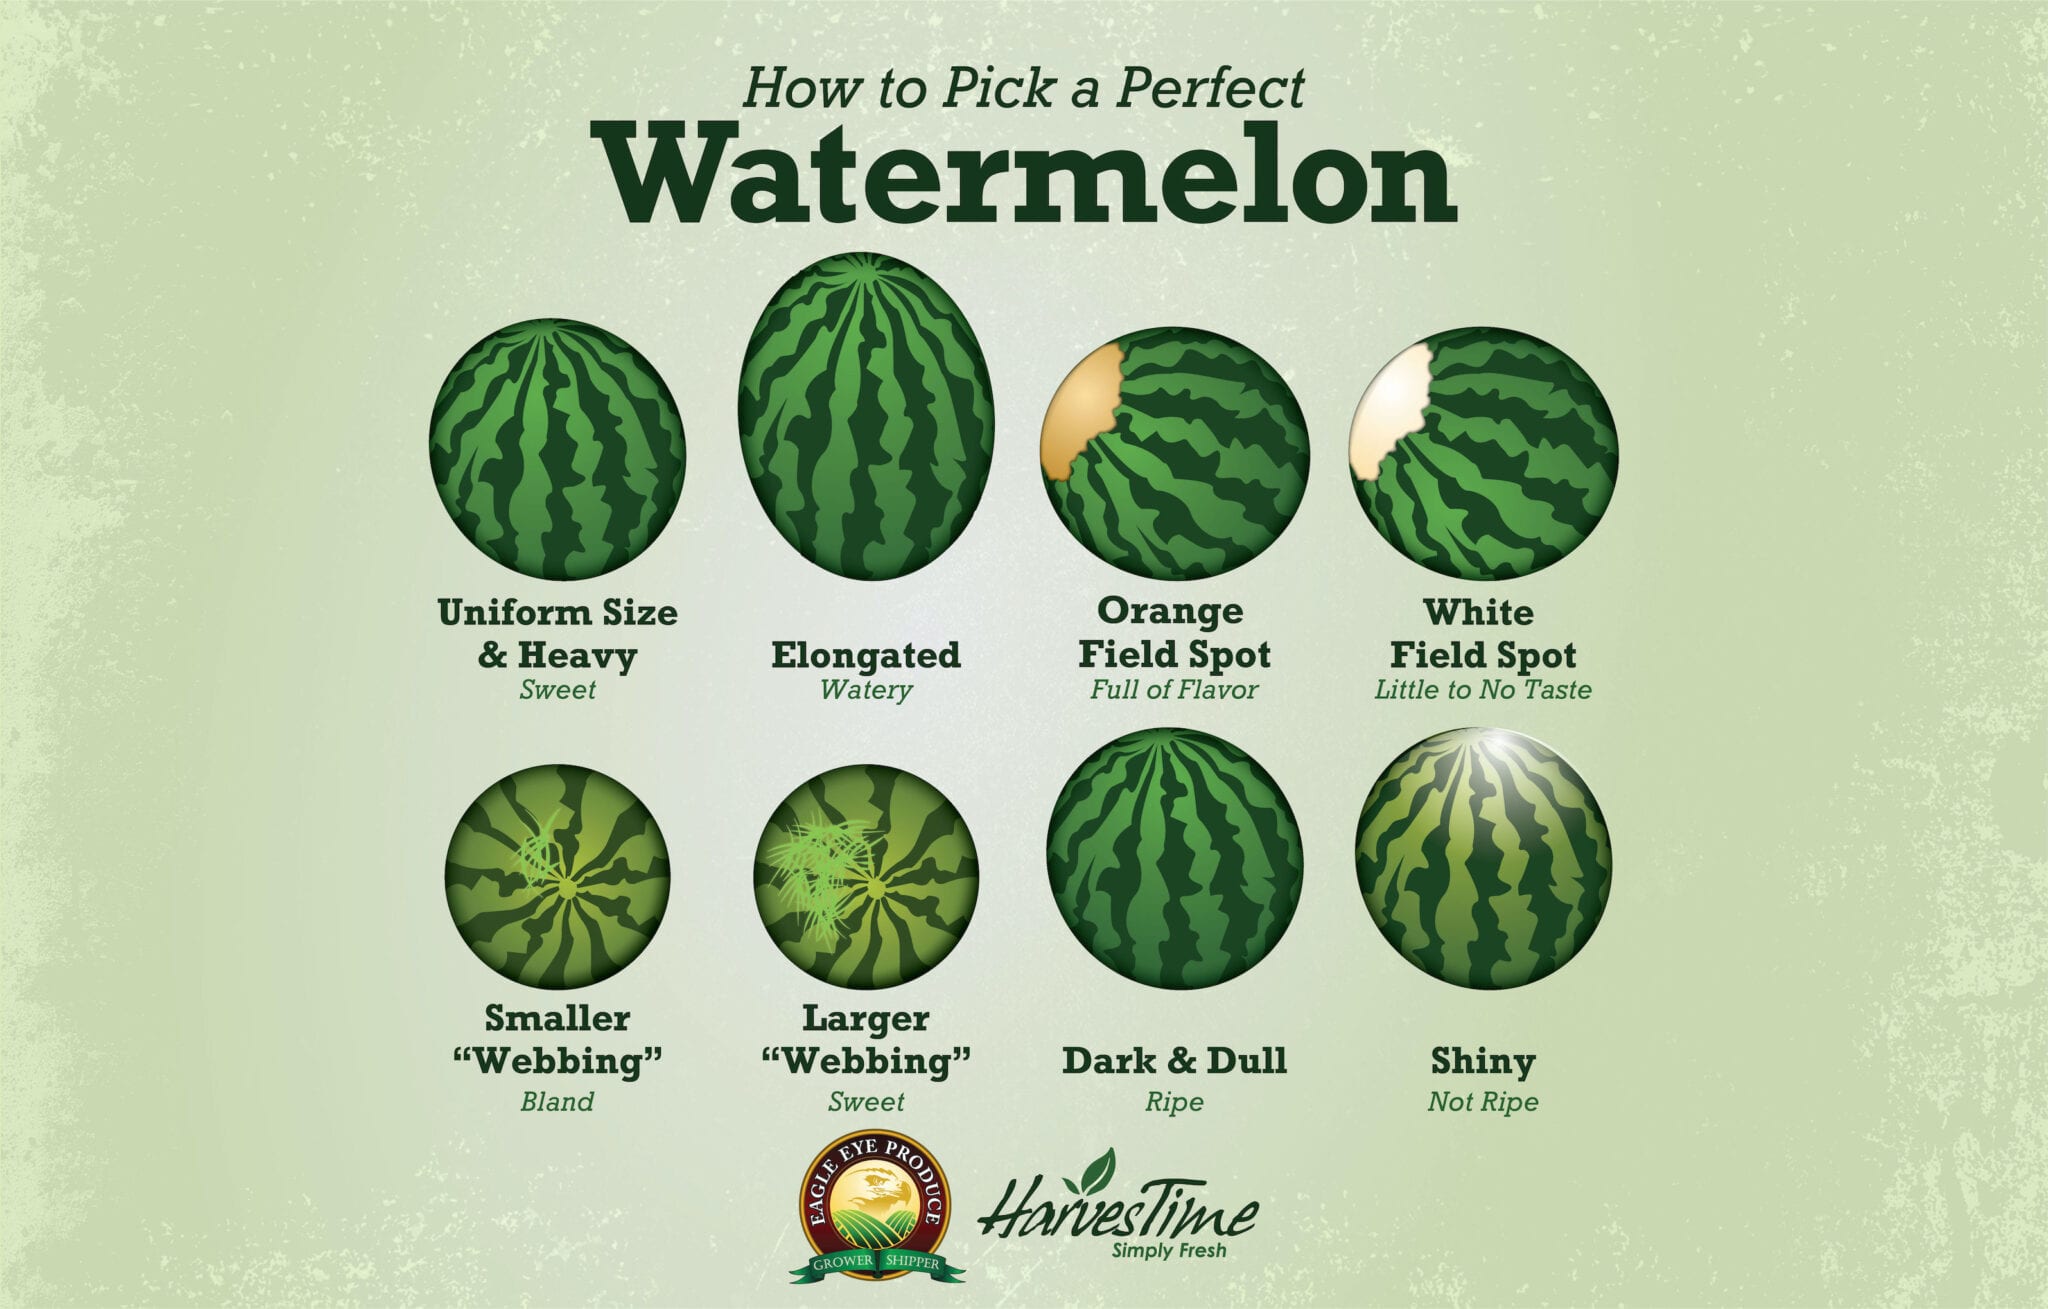 4 Ways to Tell if Your Watermelon Is Ripe